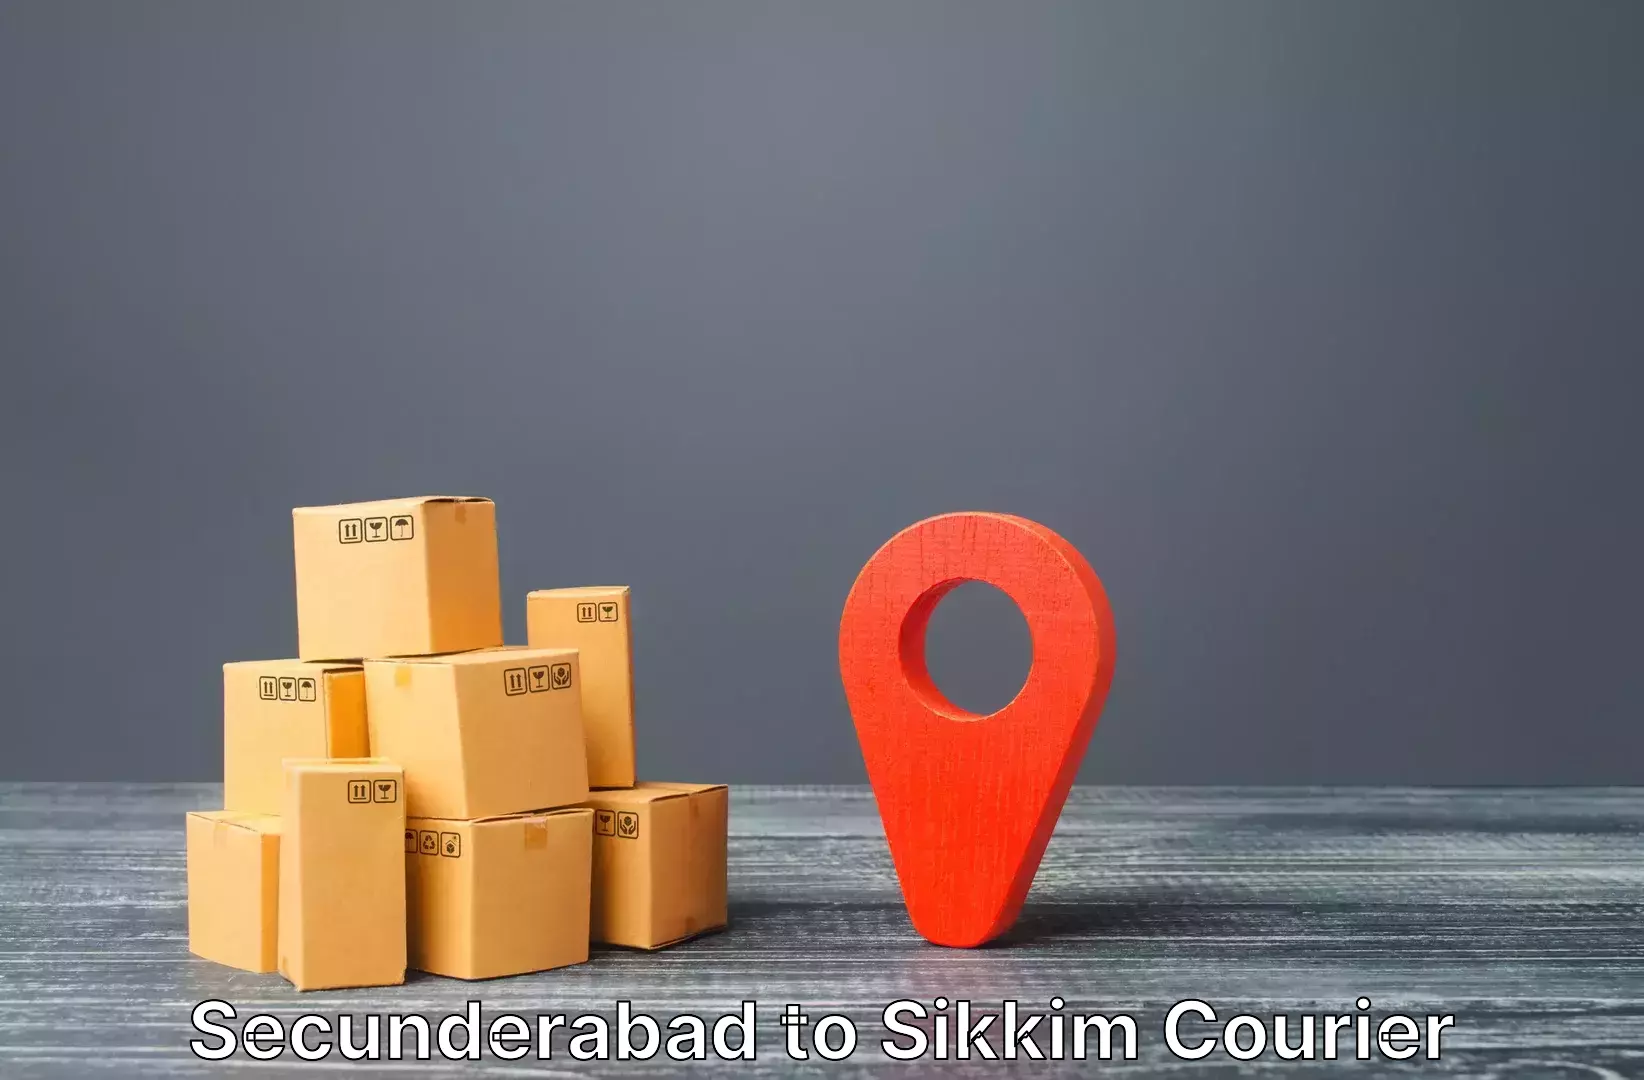 Luggage delivery app Secunderabad to Rangpo